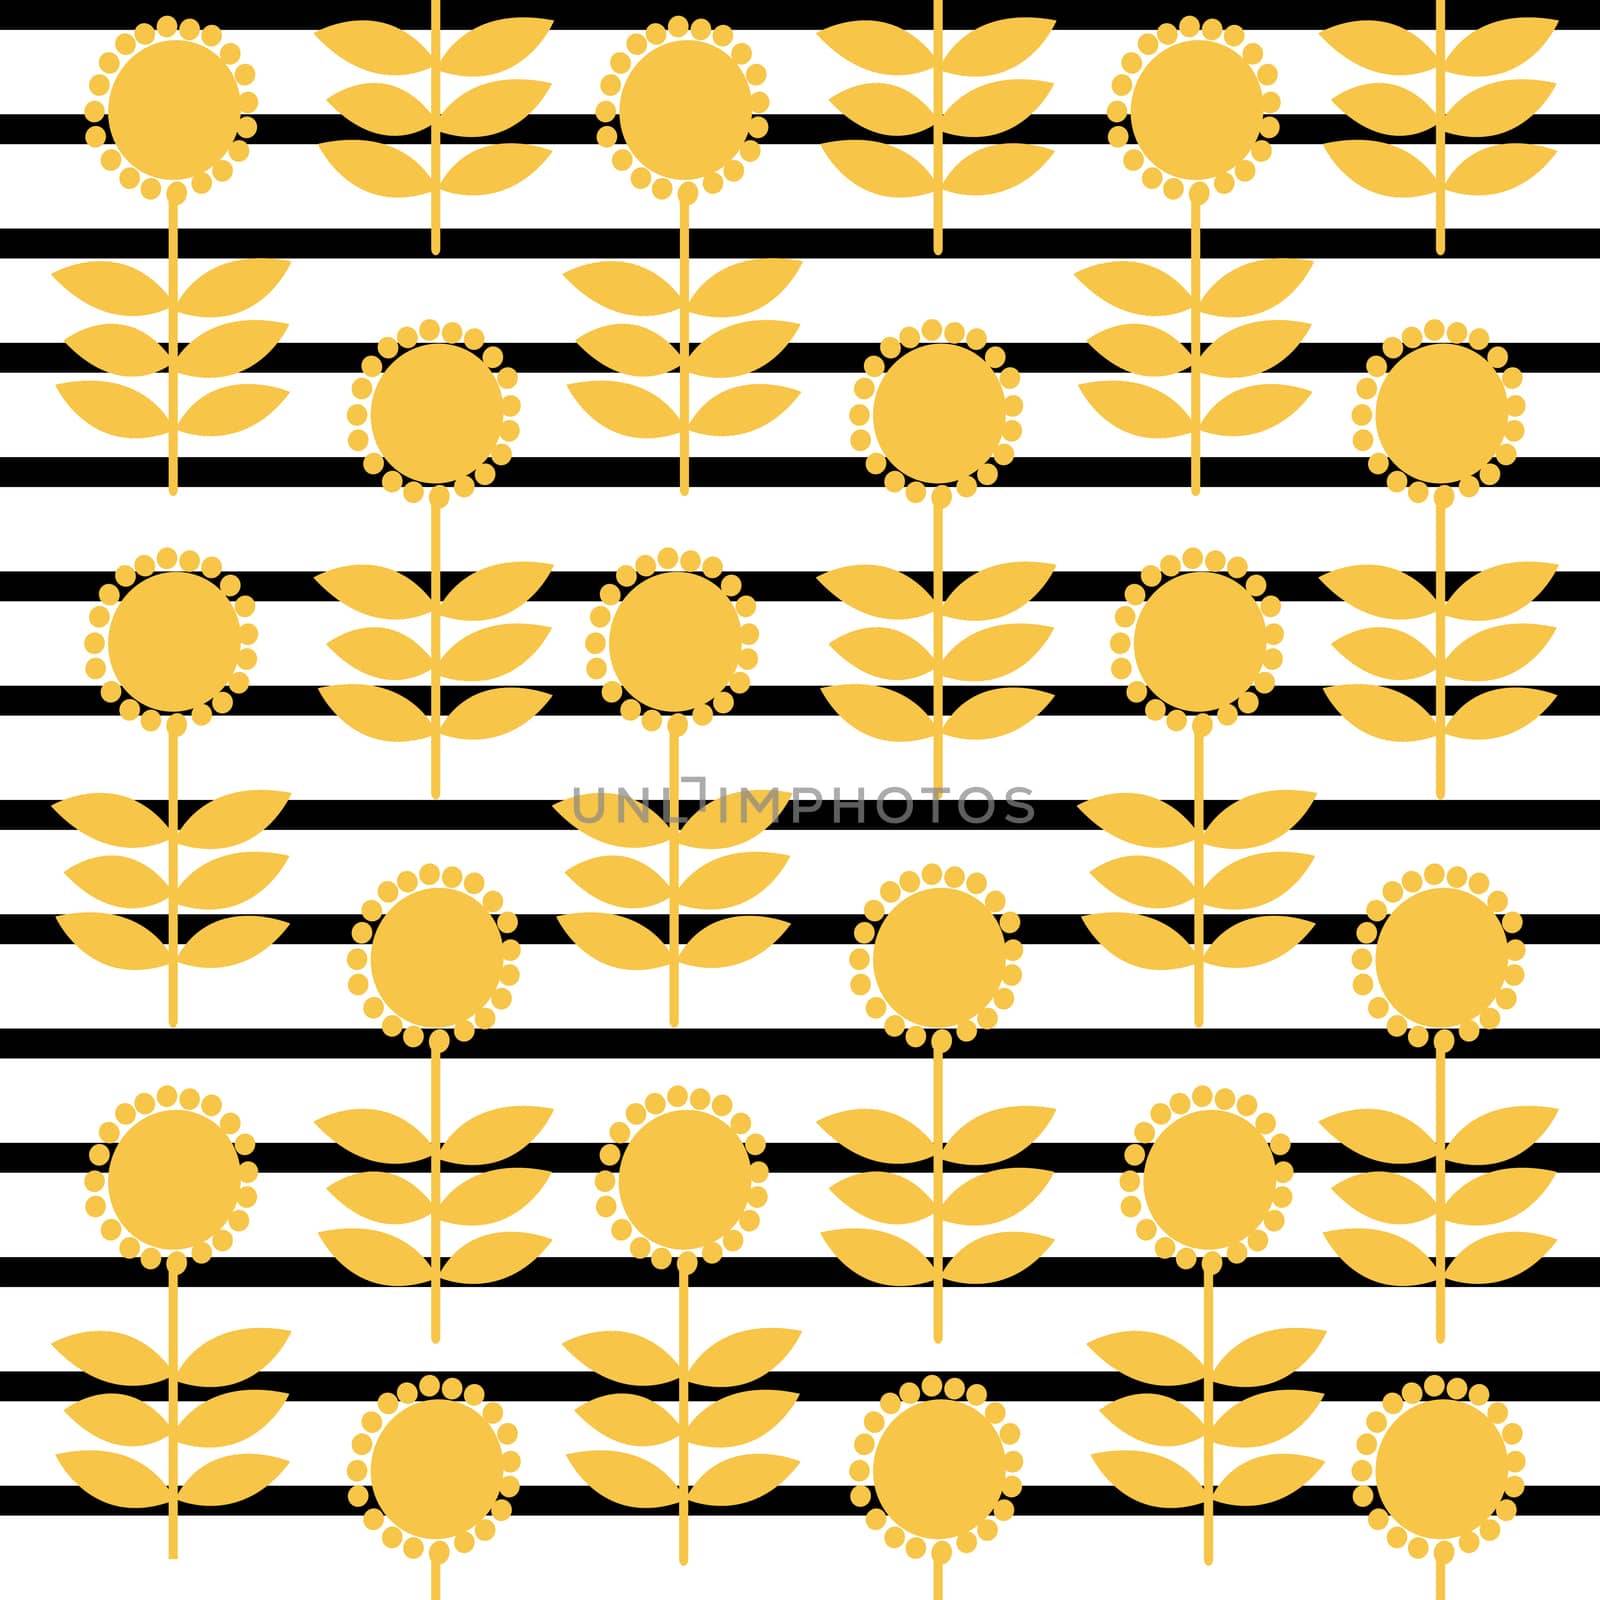 Vintage pattern with stylized sunflowers on striped background